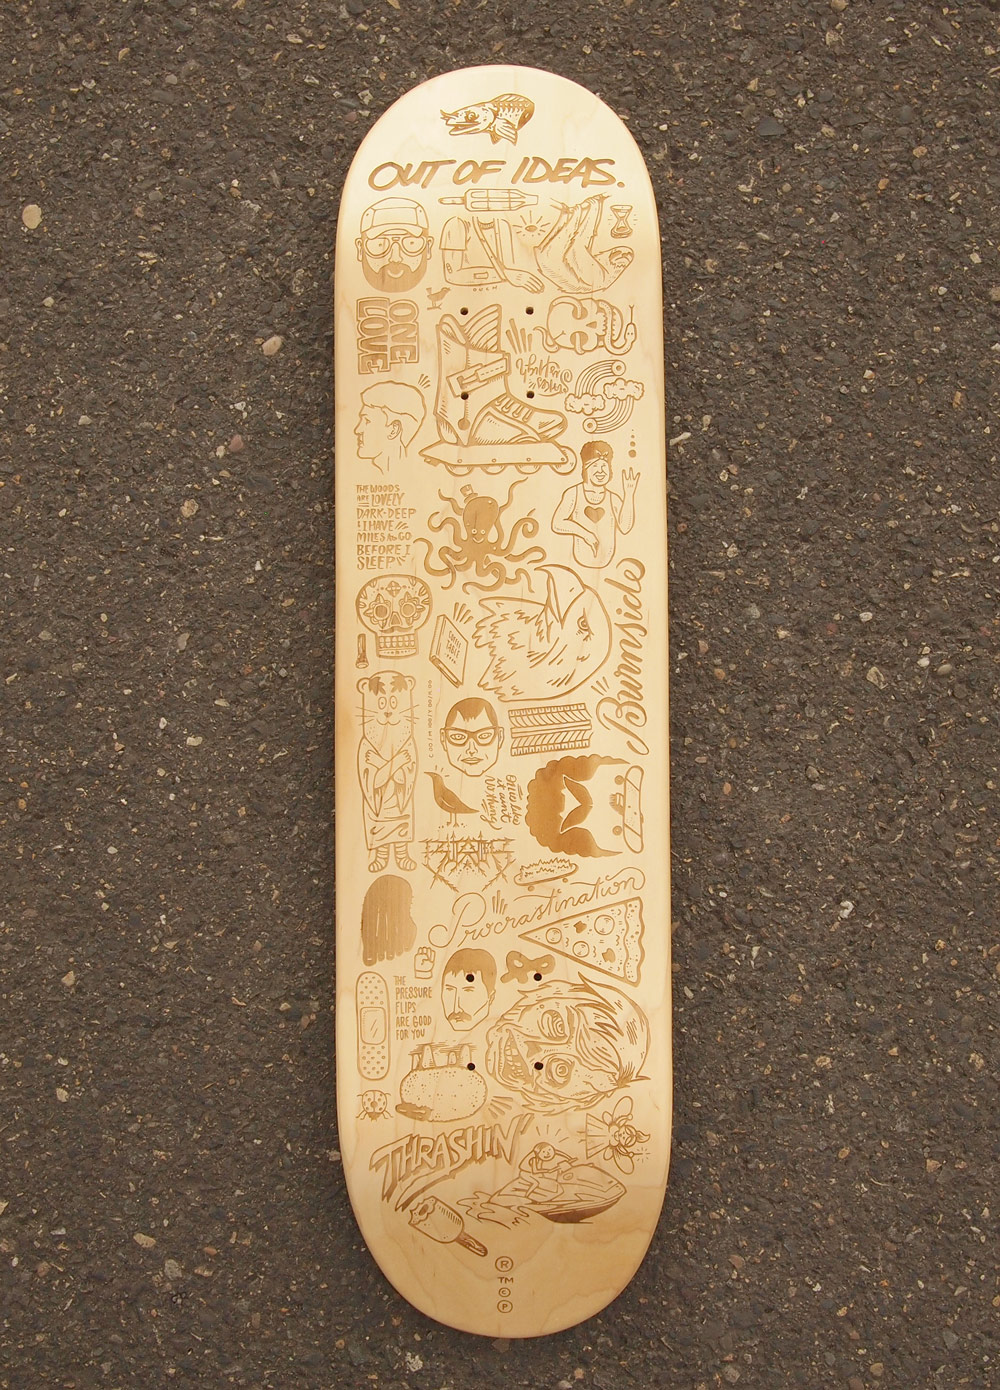 Laser-cut skateboard deck for a fundraiser gallery show that used Instagram to gather “ideas” from friends, with every idea illustrated on the board